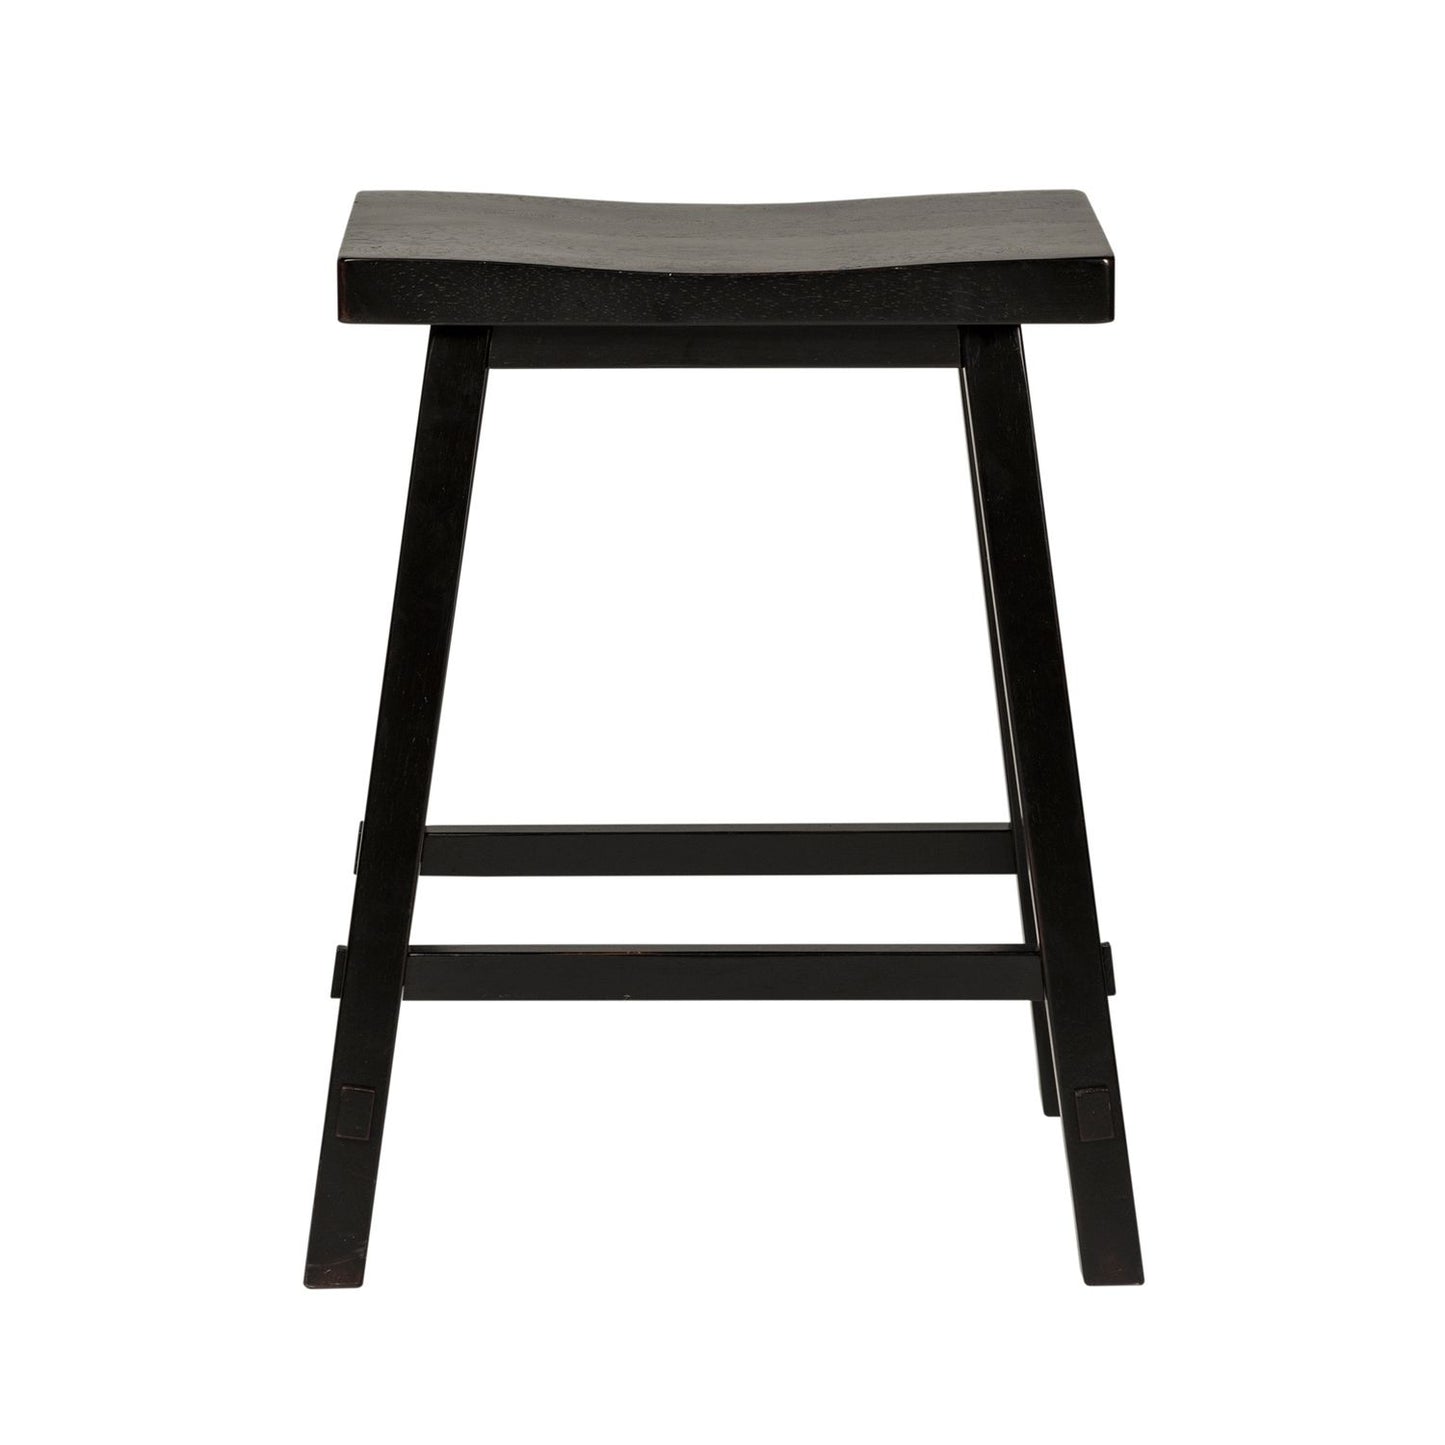 Creations II Collection Sawhorse Saddle Stool Black 24 Inch